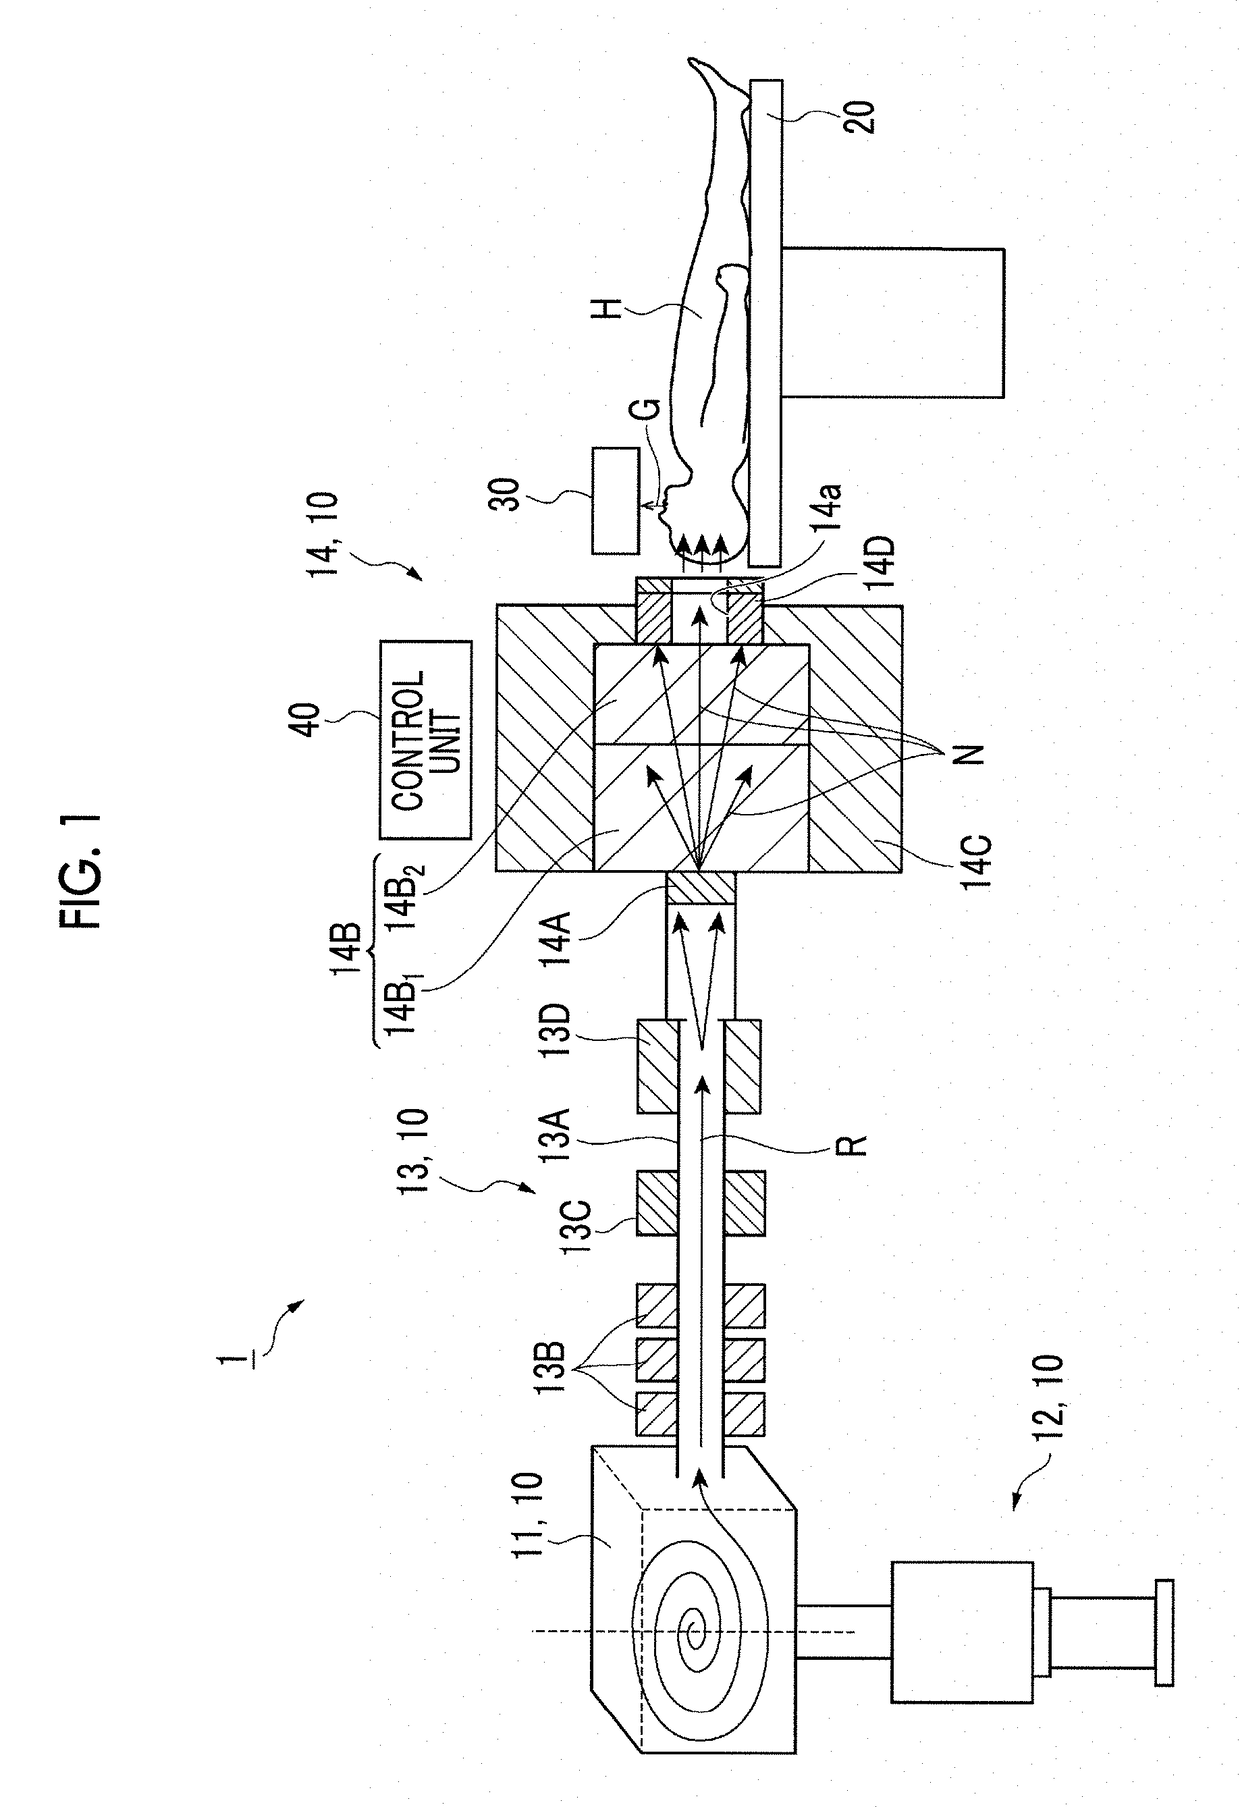 Neutron capture therapy system and gamma ray detector for neutron capture therapy